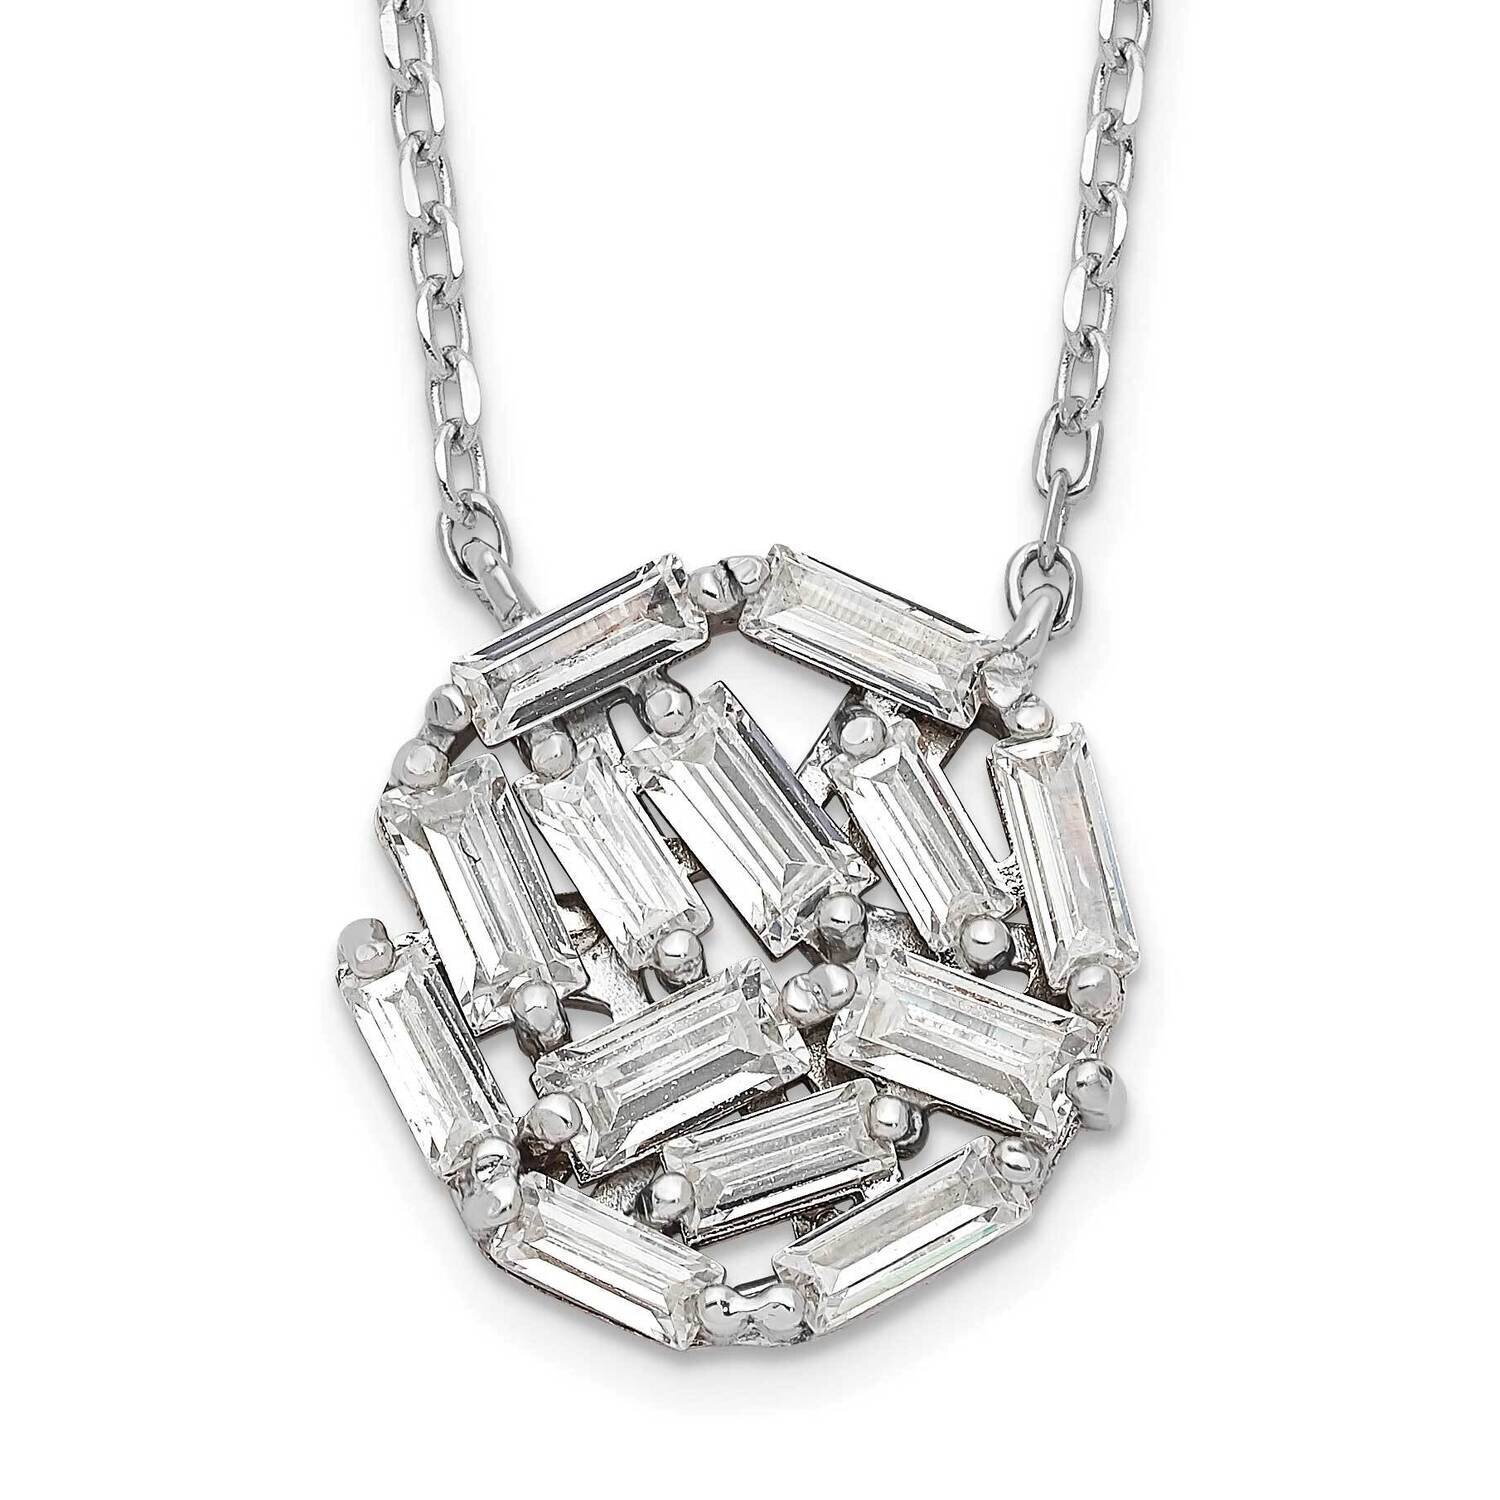 Cheryl M Rhodium-Plated Baguette CZ Diamond with 2 Inch Ext. Necklace Sterling Silver QCM1509-16